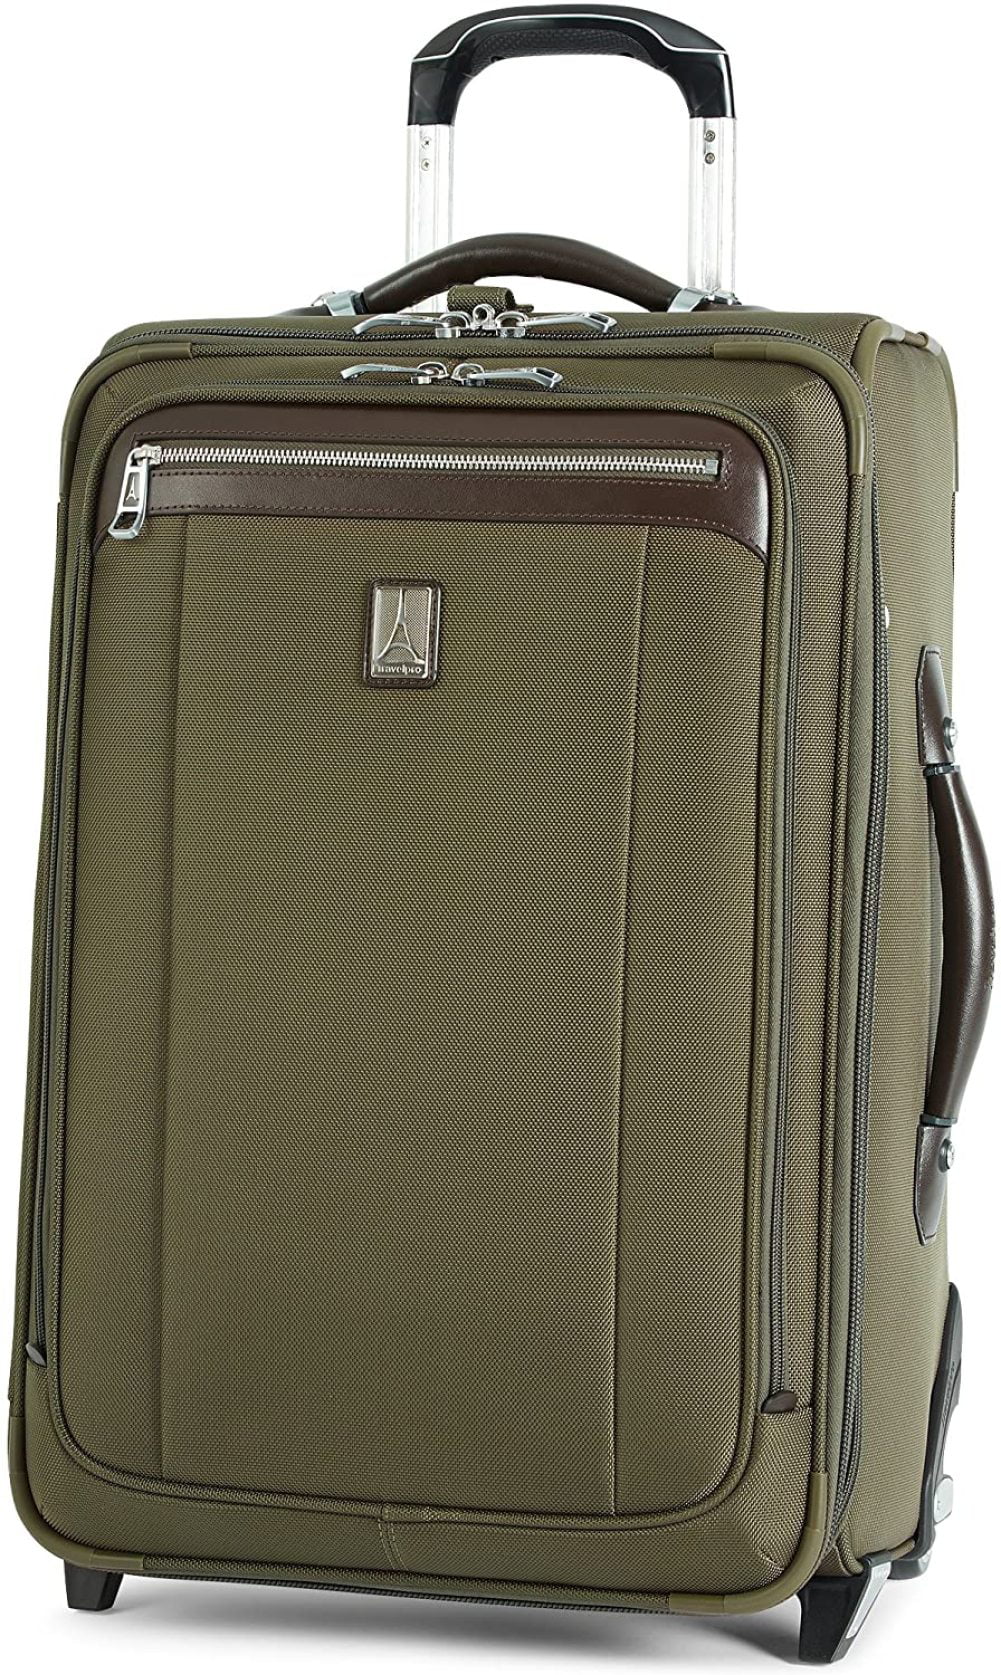 25-in. Olive Travelpro Platinum Magna 2 Expandable Spinner Suiter Suitcase 